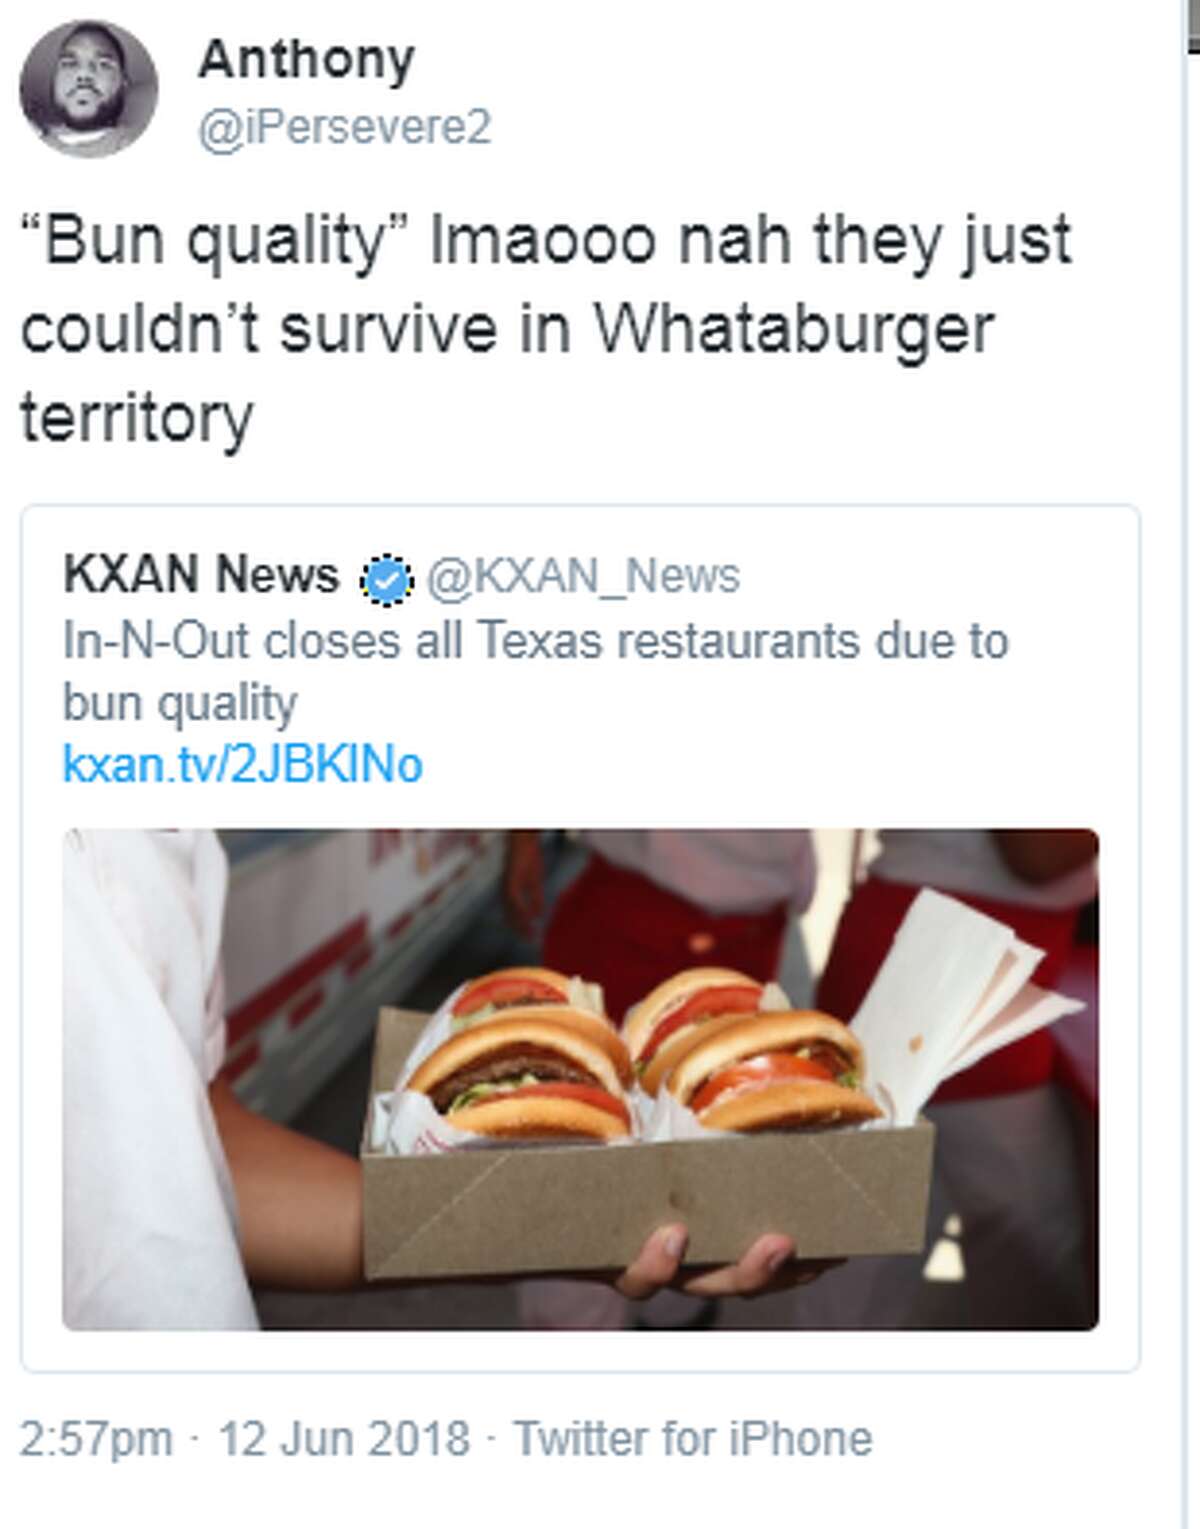 Whataburger fans and supporters took to the Internet after In-N-out announced closures in Texas due to bun quality.